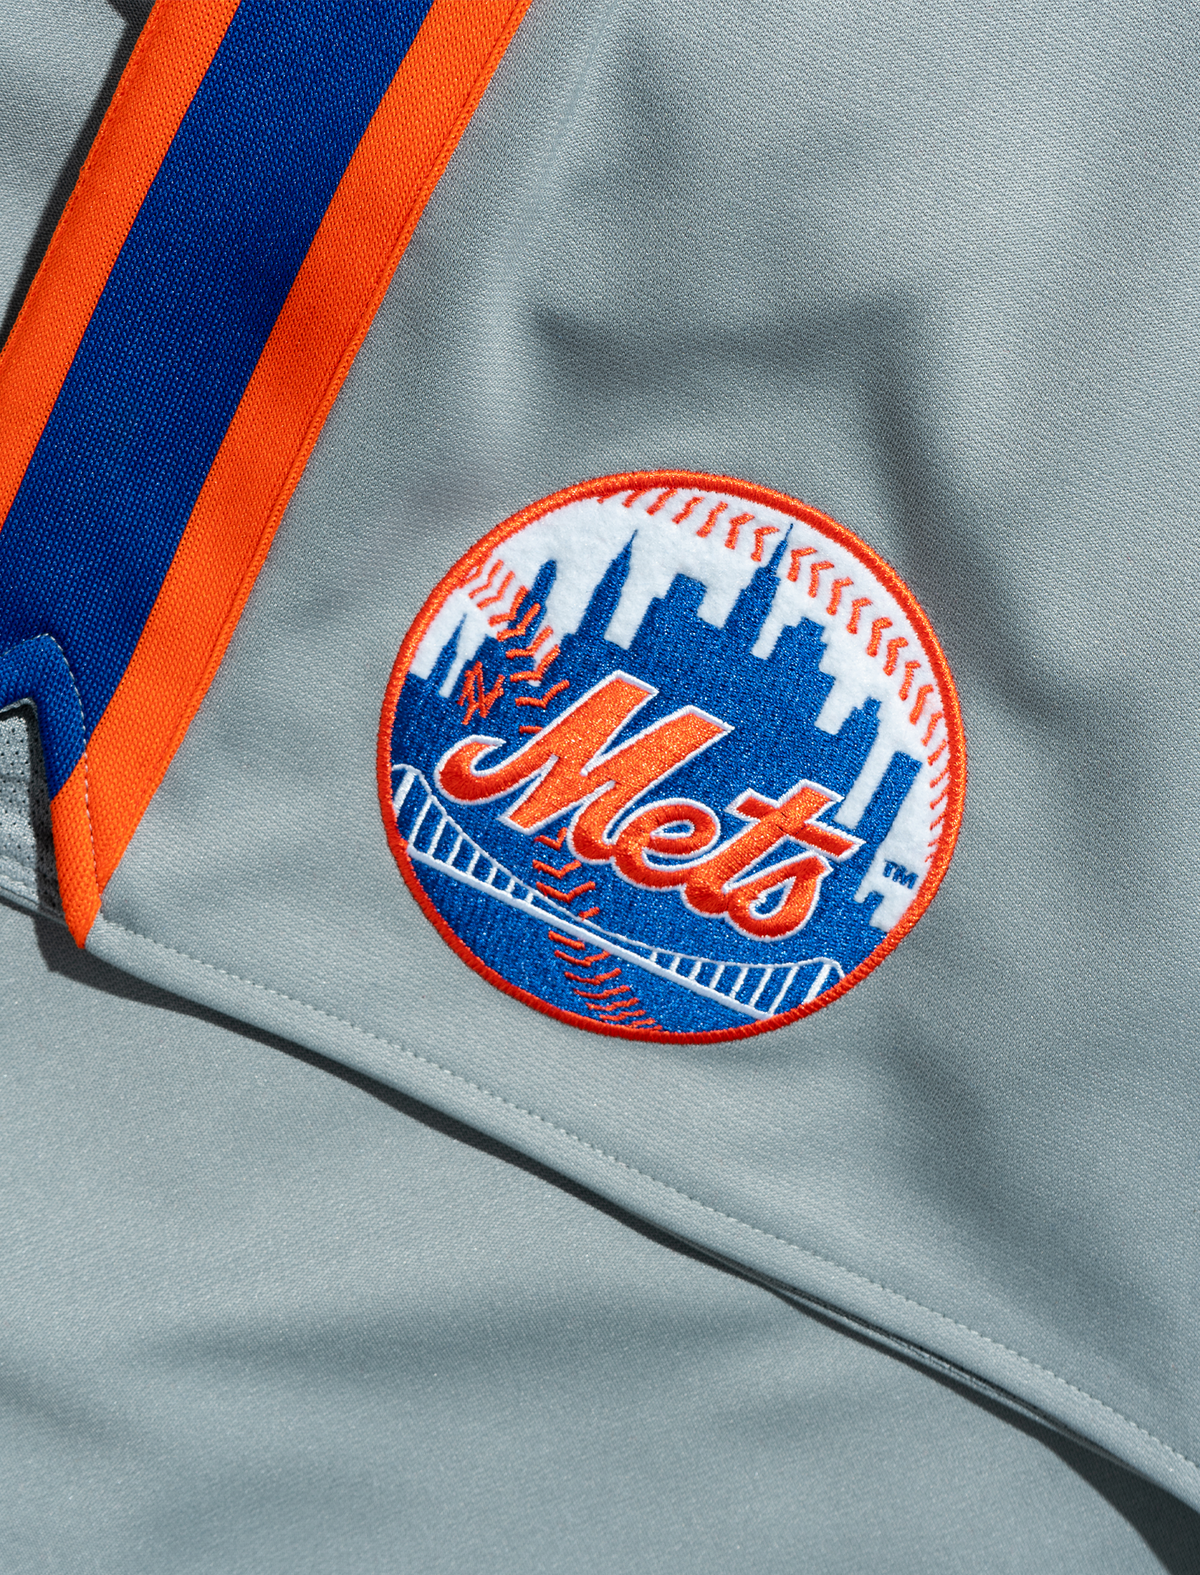 mets mitchell and ness jersey